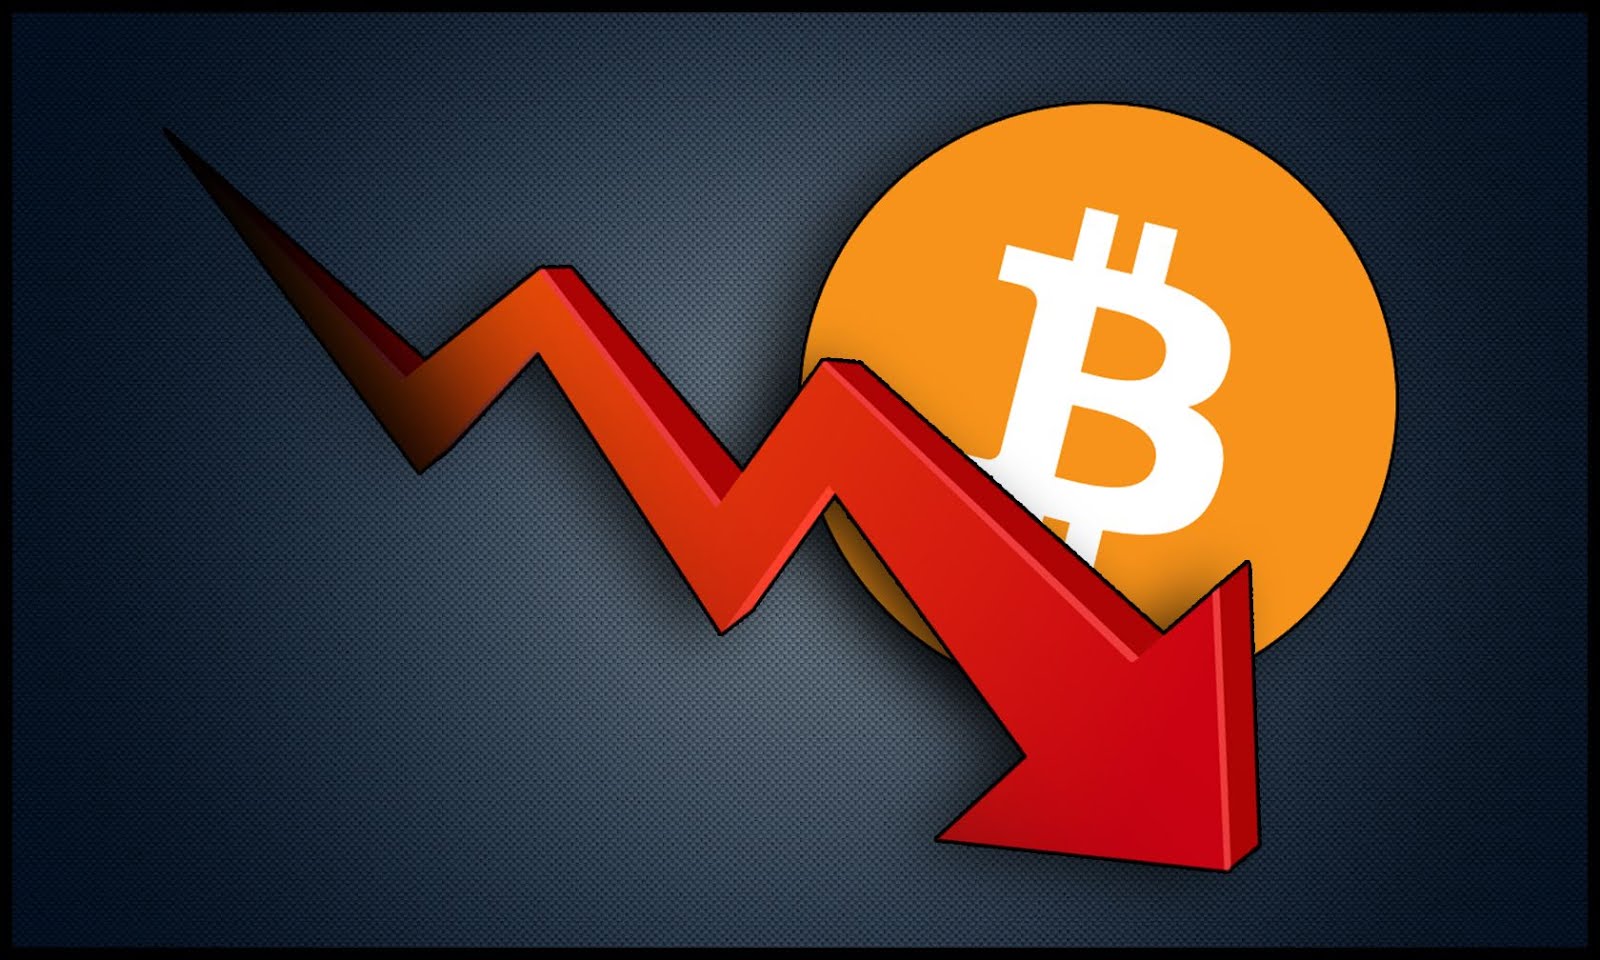 Bitcoin and Gold Prices Crash on Fed Policy Concerns
